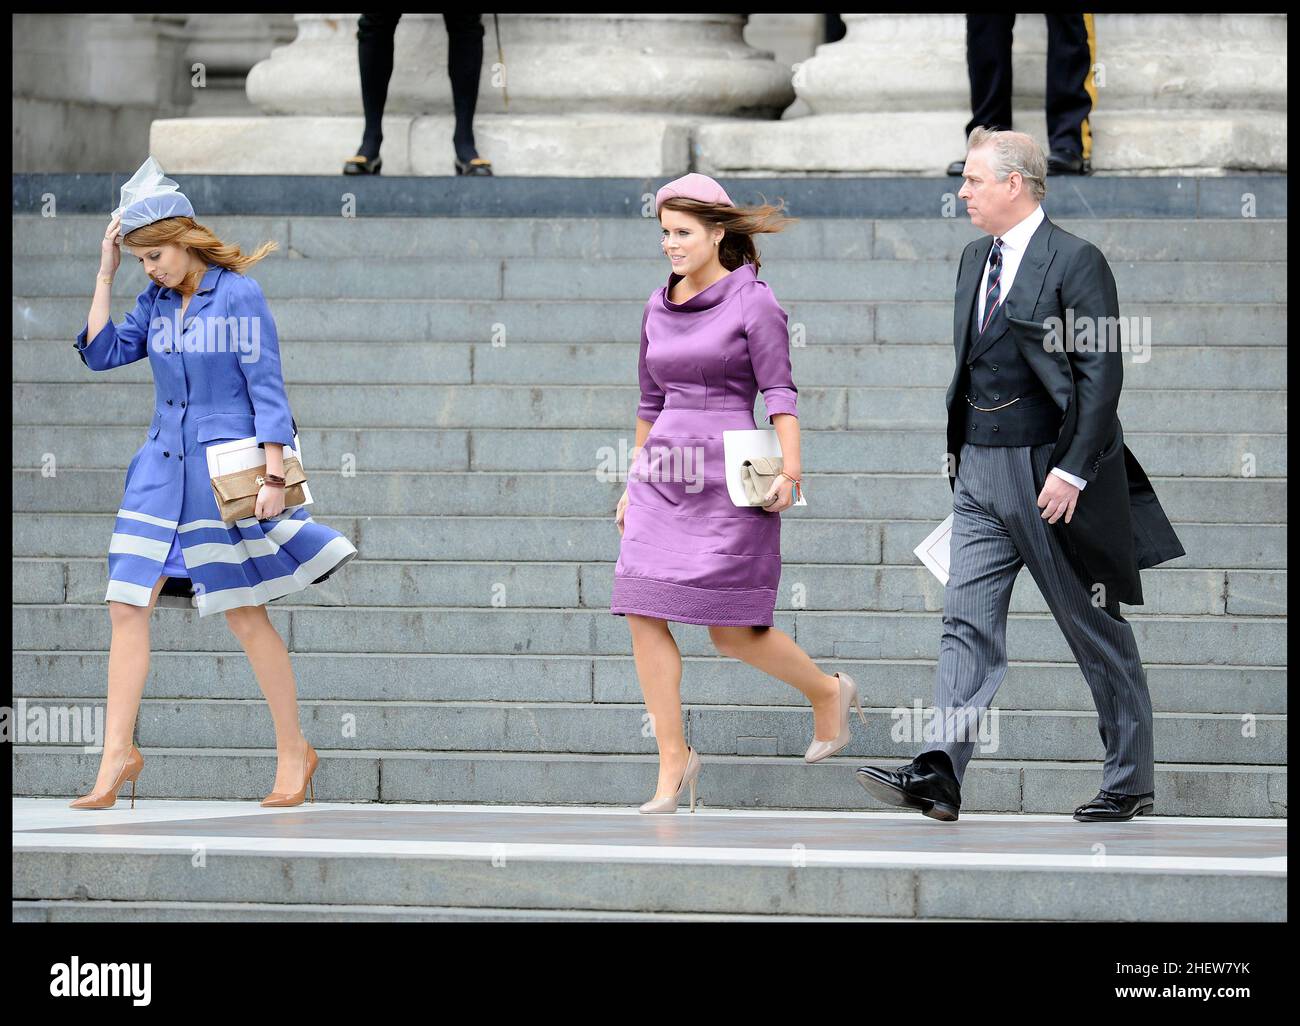 FileImage ©Licensed to Parsons Media. Prince Andrew is to face a civil case in the US. It has been reported that Prince Andrew is to face a civil case in the US over allegations he sexually assaulted a woman when she was 17.  Virginia Giuffre is suing the prince, claiming he abused her in 2001.   Princess Eugenie and Princess Beatrice and Prince Andrew leave St Pauls Cathedral after the National Service of Thanksgiving celebrating the Queens Diamond Jubilee Tuesday June 5, 2012. Photo By Andrew Parsons/Parsons Media   Picture by Andrew Parsons / Parsons Media Stock Photo